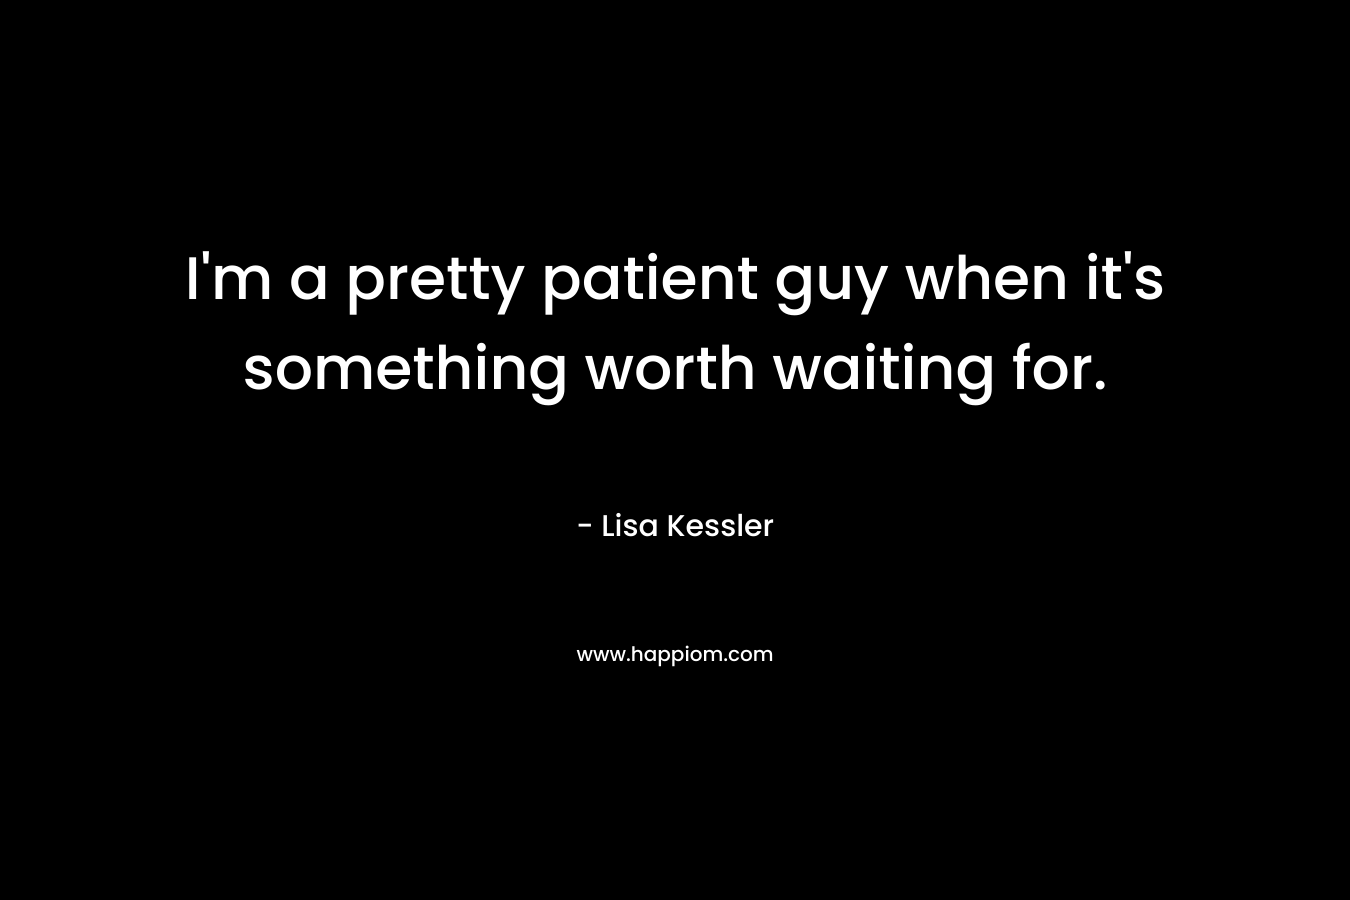 I'm a pretty patient guy when it's something worth waiting for.